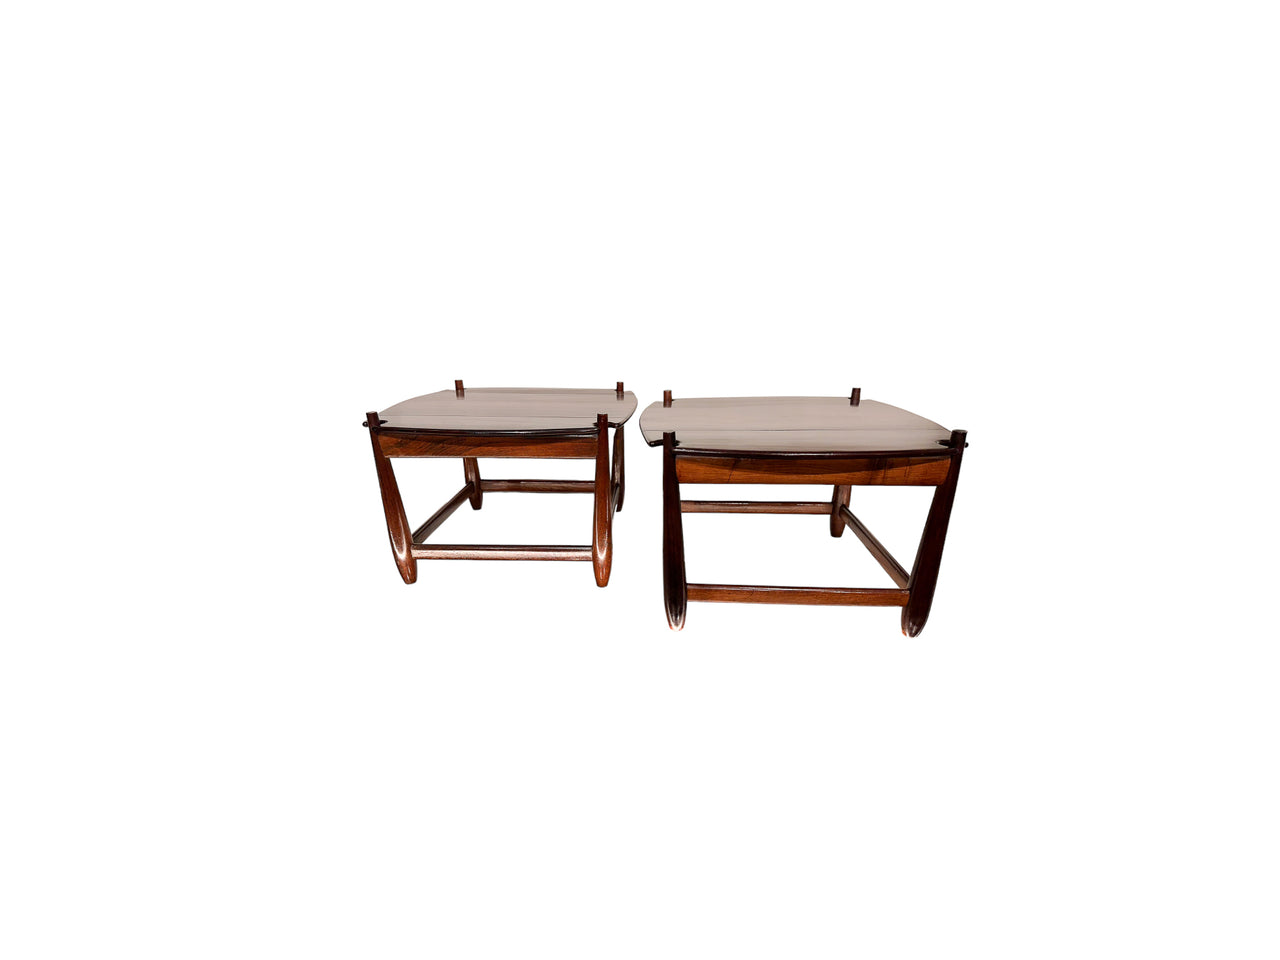 "Arimelo" Side Tables by Sergio Rodrigues, 1958 - Lot 596